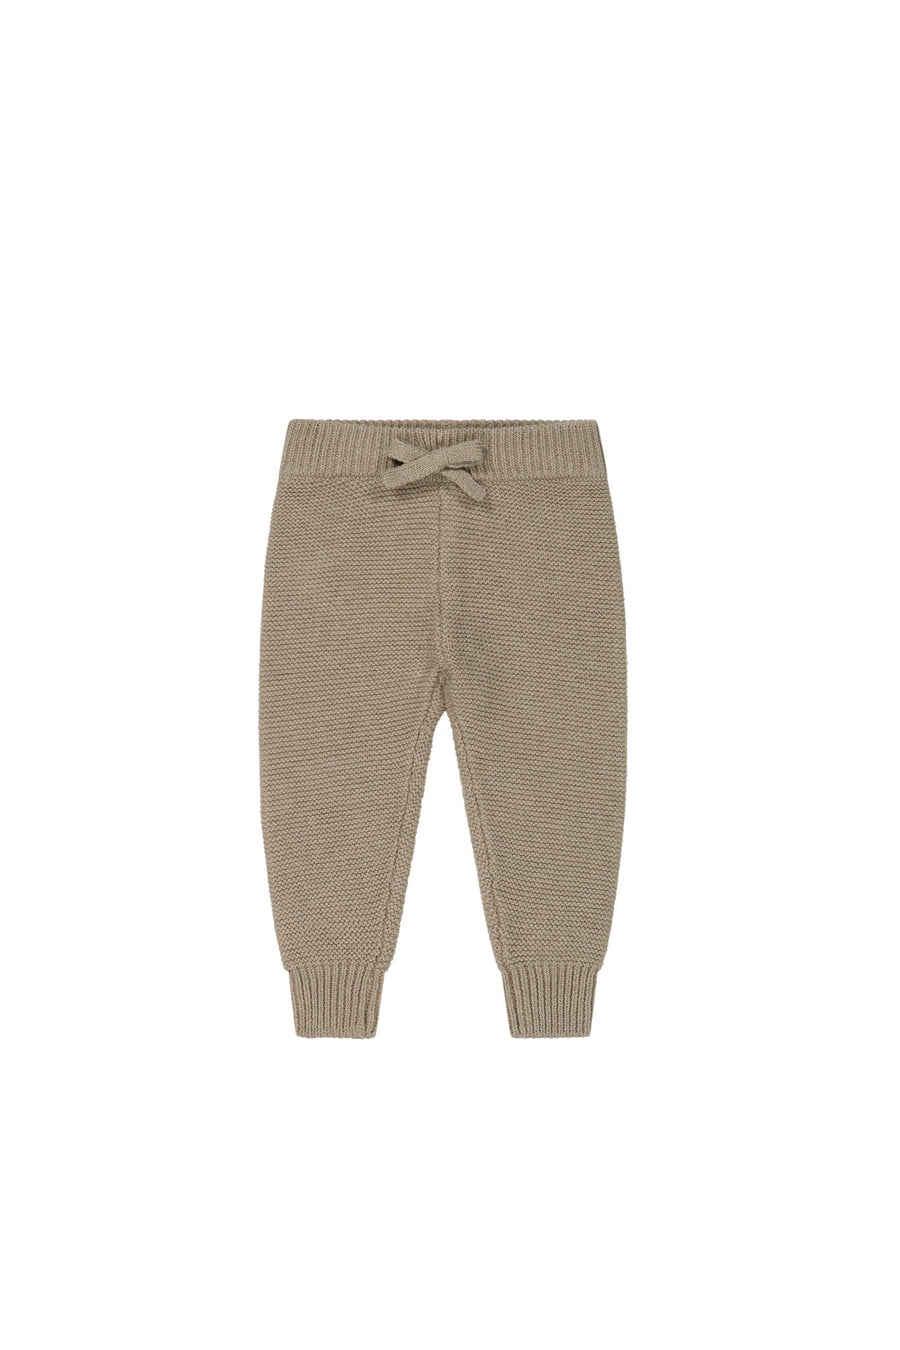 Ethan Pant - Cashew Marle Childrens Pant from Jamie Kay USA